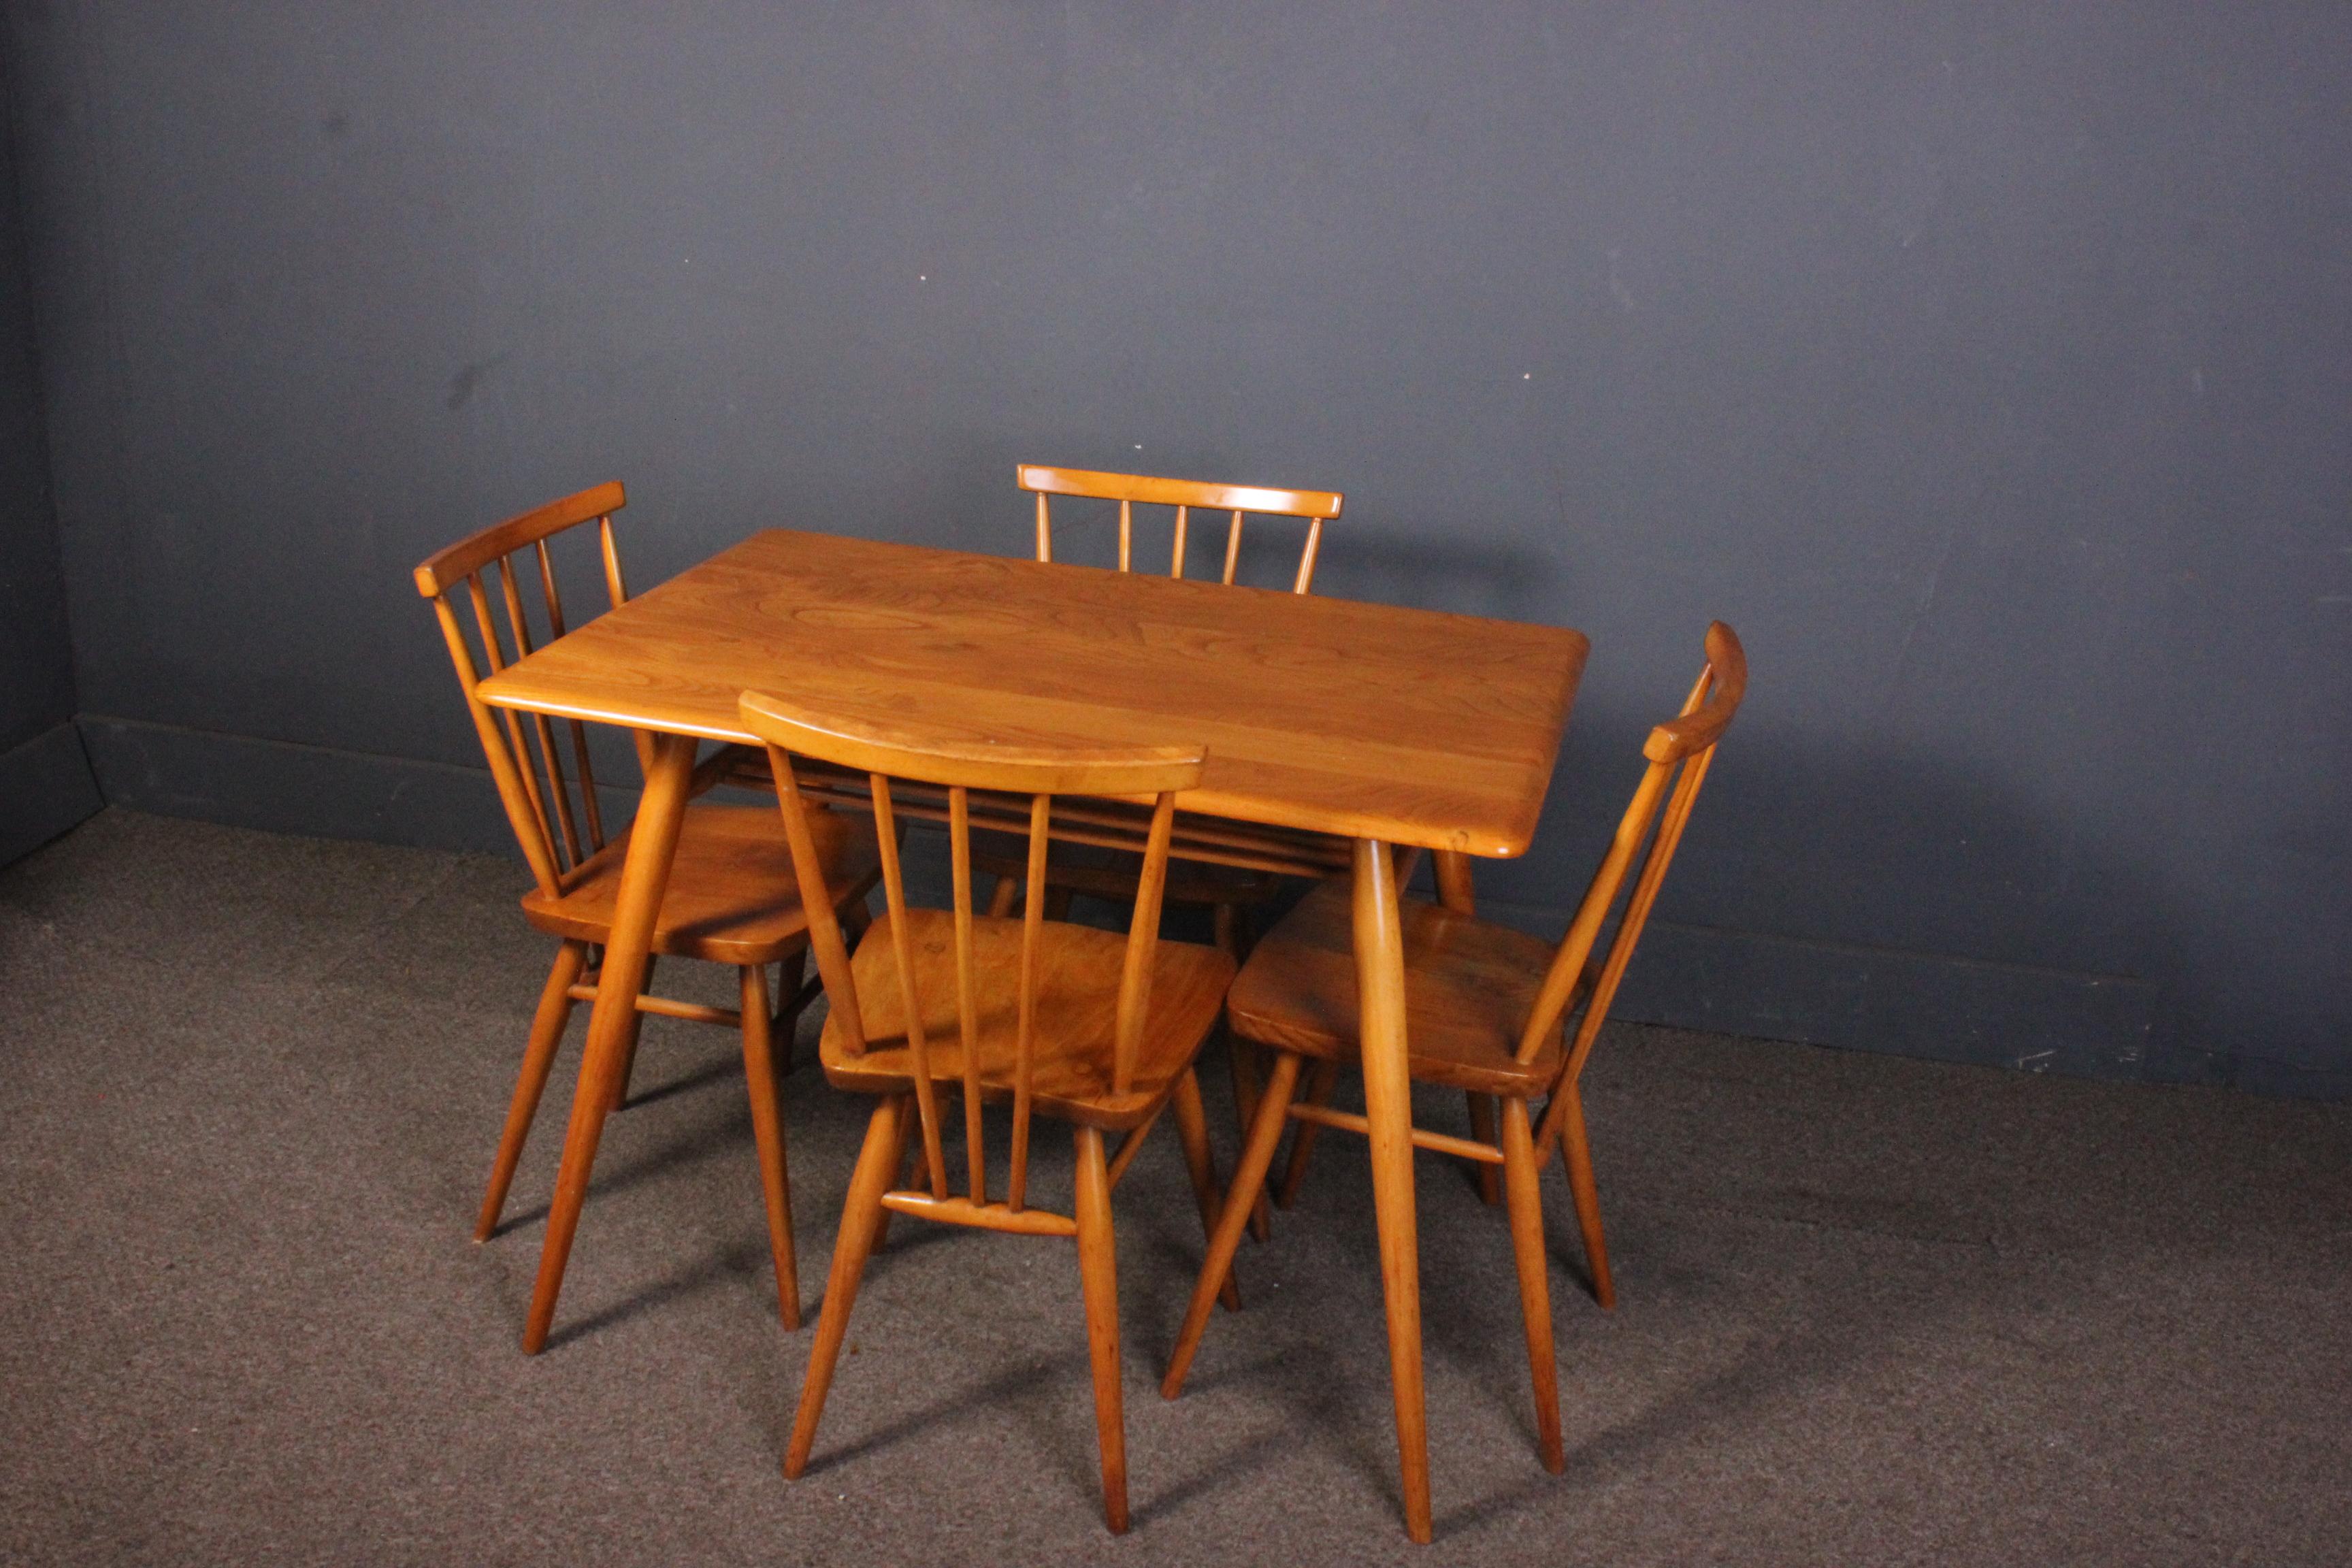 A beautiful vintage 1960s Ercol dining/breakfast table with magazine rack and 391 Ercol chairs x 4. The table and chairs feature an elm top and beech legs and are in very good original condition with only a few slight marks due to use.